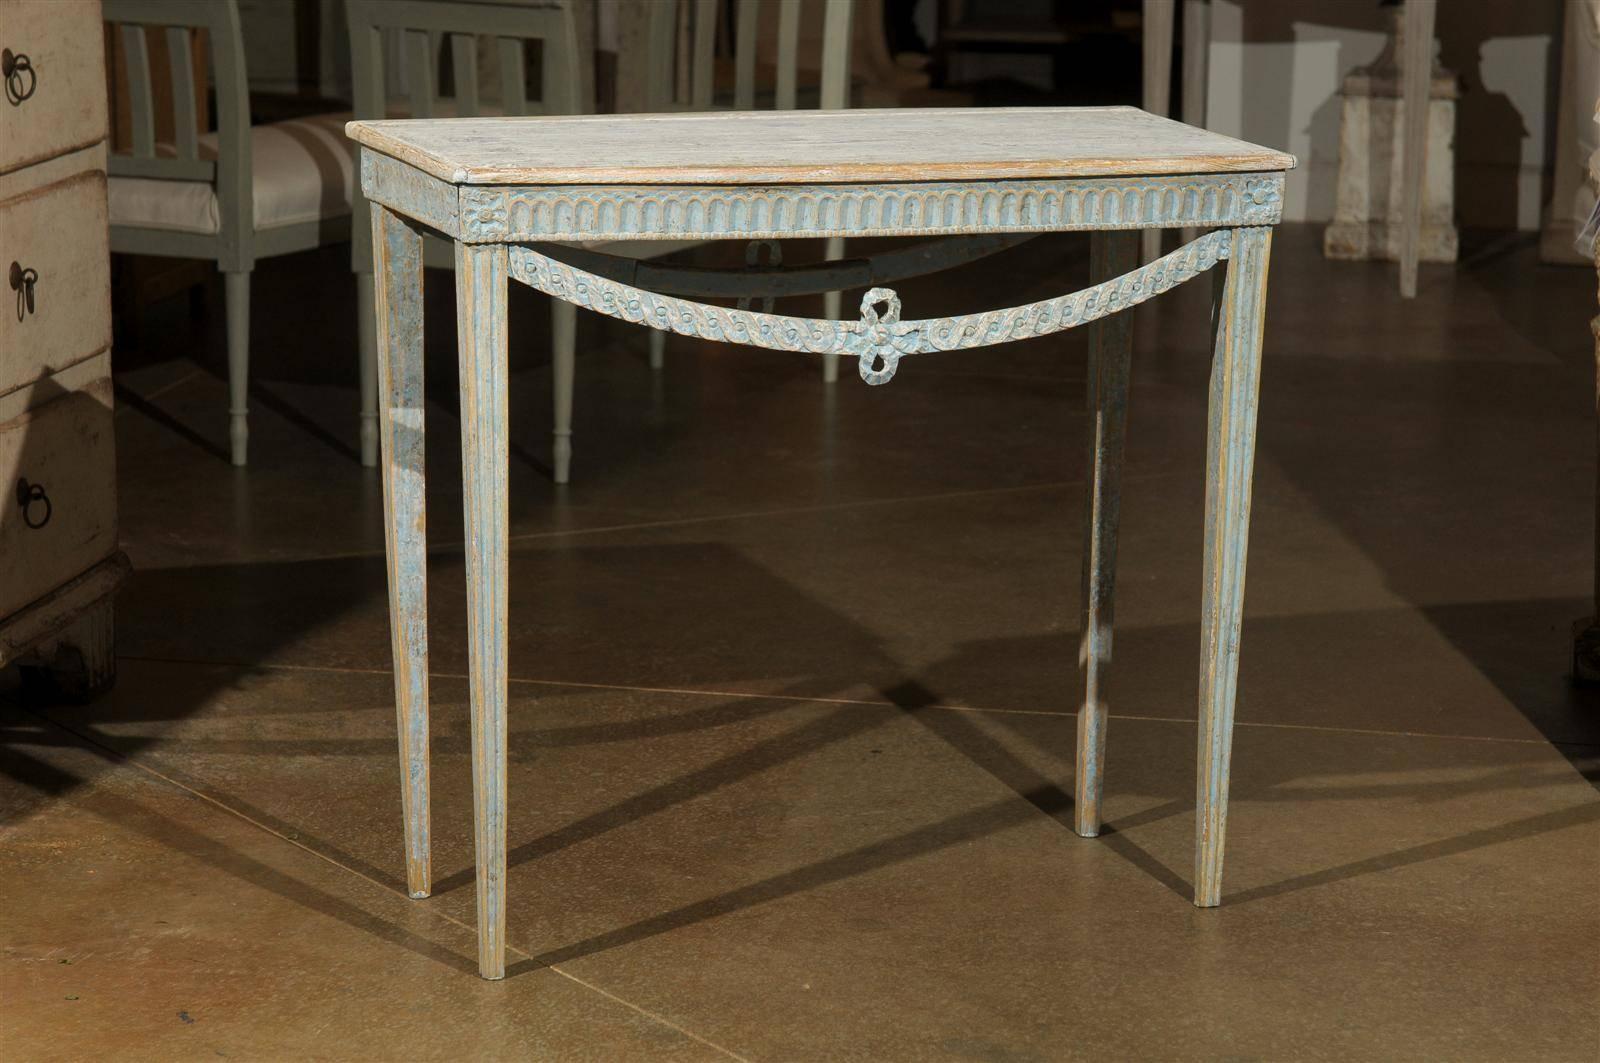 Swedish 18th century period Gustavian console table. Carved on all four sides. Painted in a pale blue with pale grey top. Carved swags. Original paint, circa 1780. This piece is listed in its original unrestored antique condition. Any wear or fading